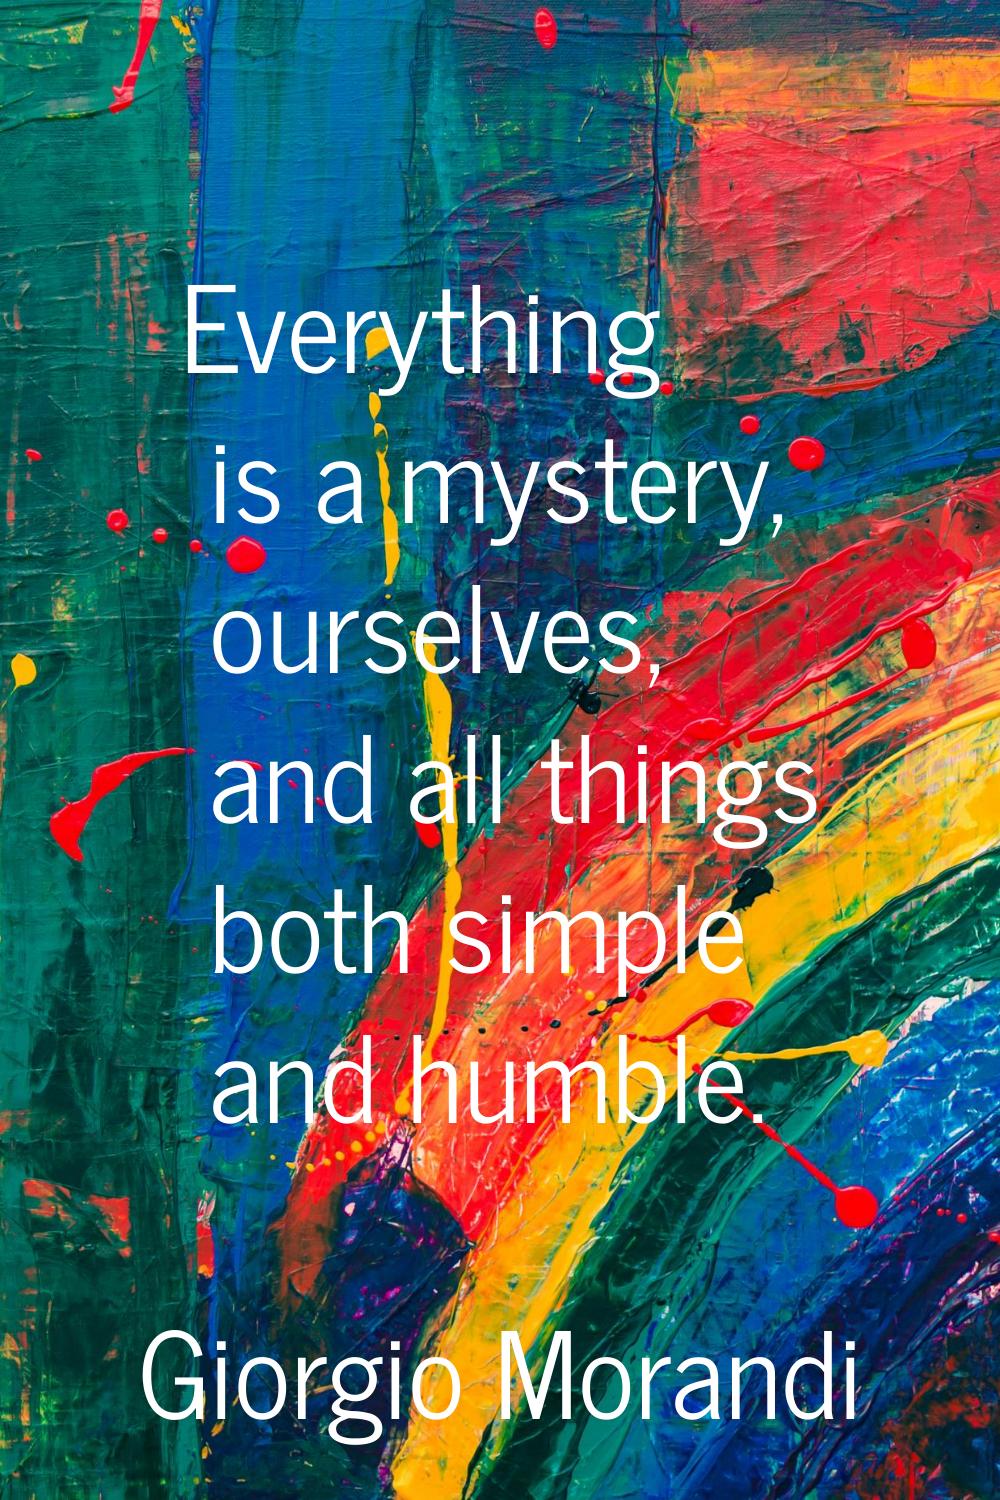 Everything is a mystery, ourselves, and all things both simple and humble.